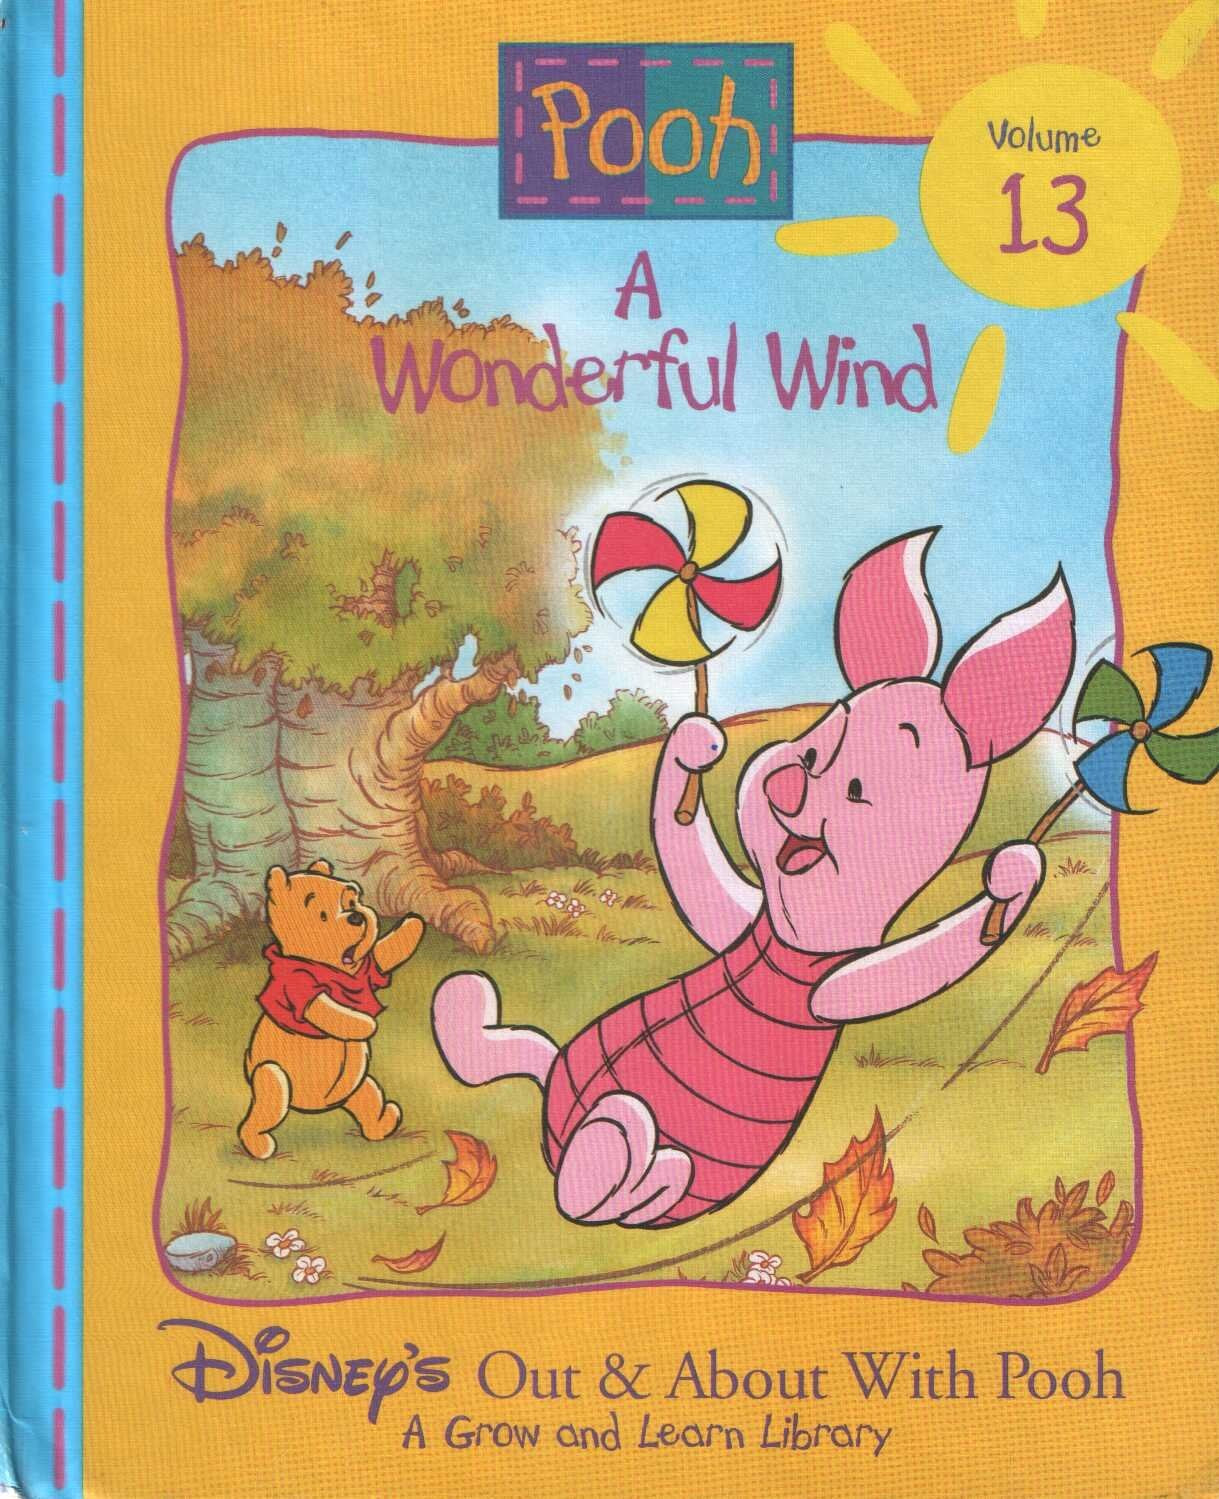 Livre ISBN 188522267X Disney's Out & About With Pooh # 13 : A Wonderful Wind